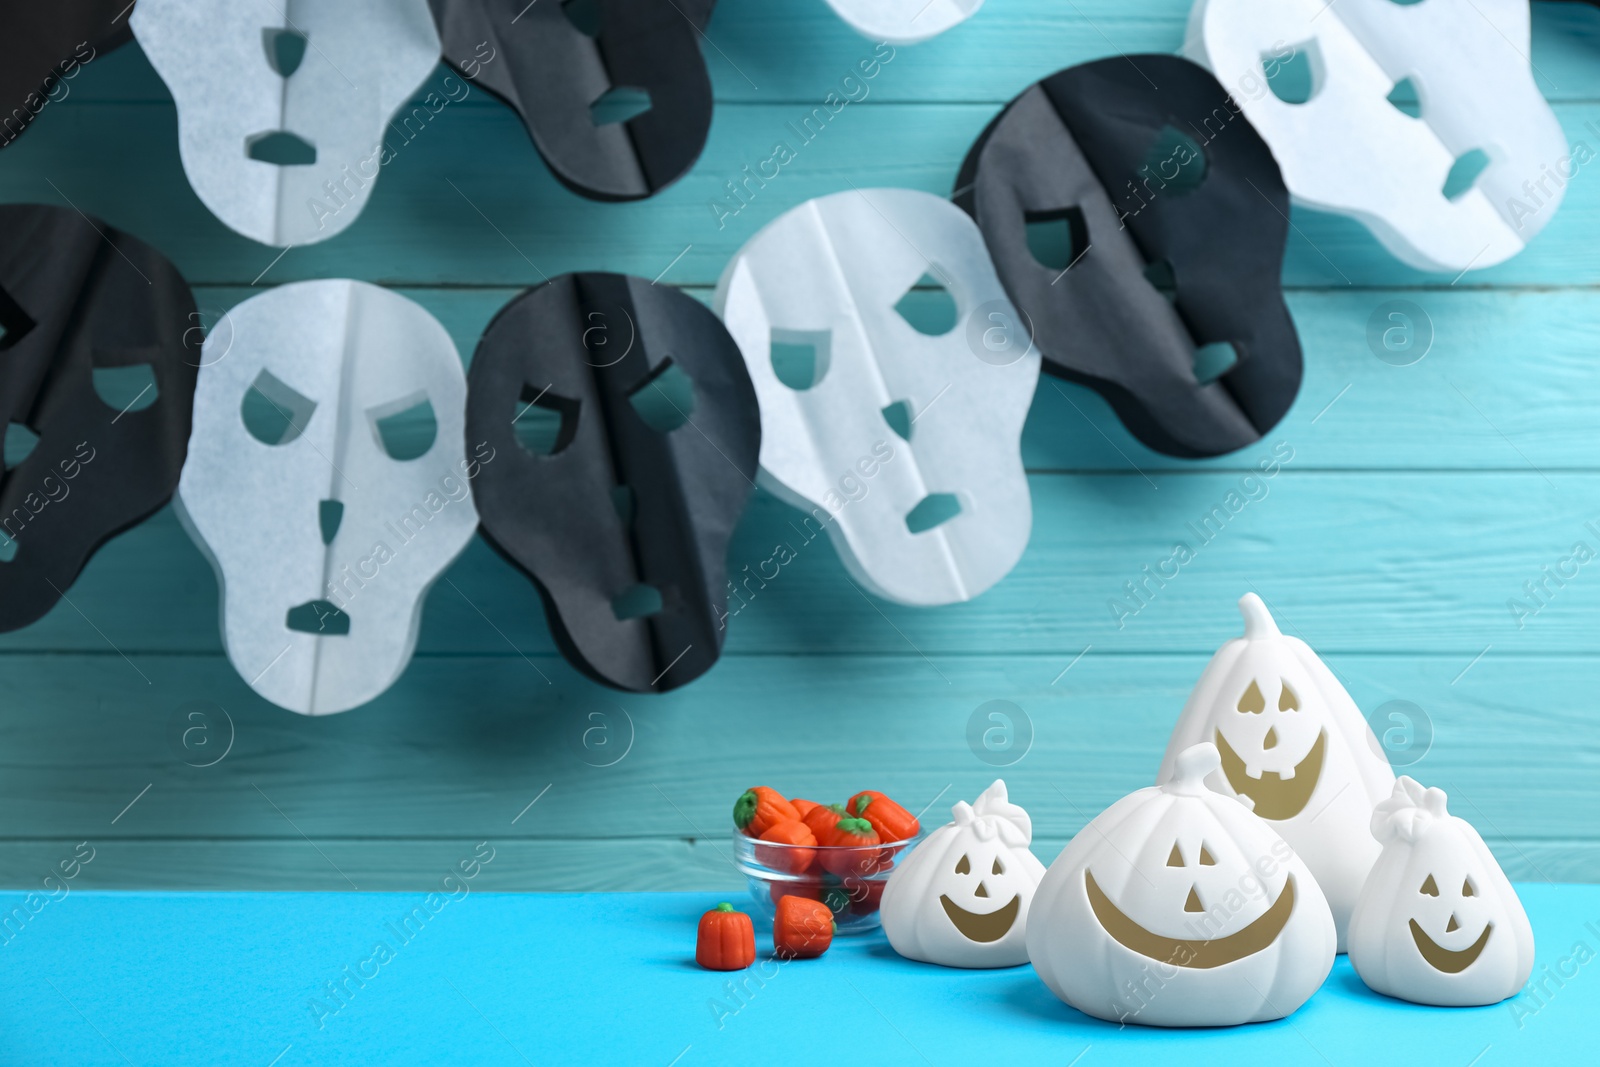 Photo of Jack-o-Lantern holders and candies on light blue table against decorated wooden background. Halloween decor